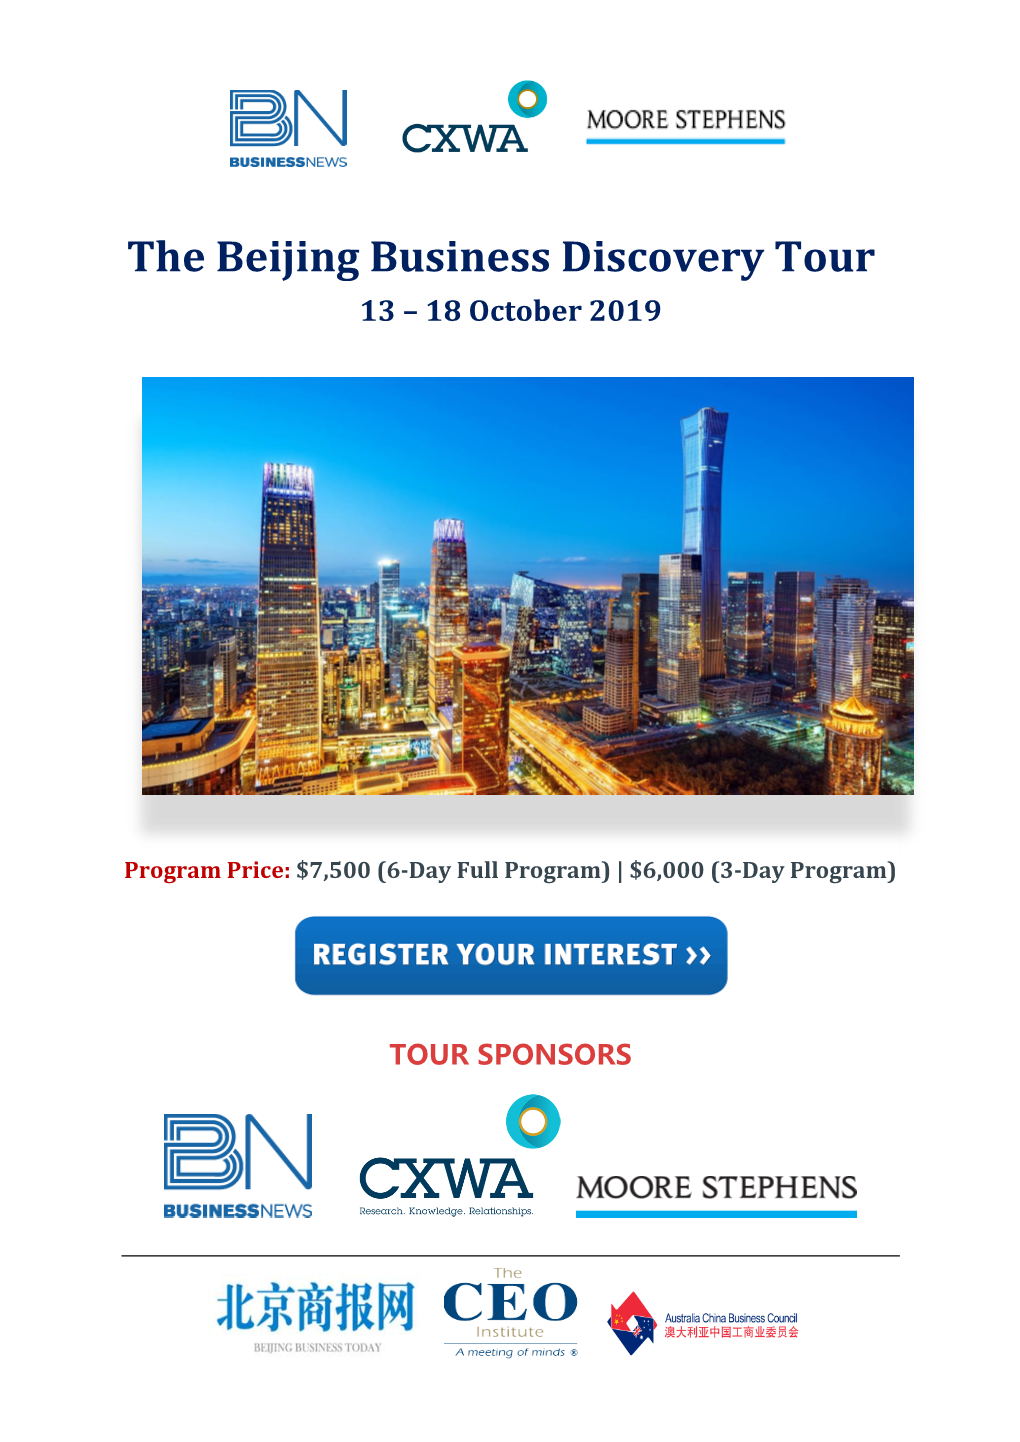 The Beijing Business Discovery Tour 13 – 18 October 2019